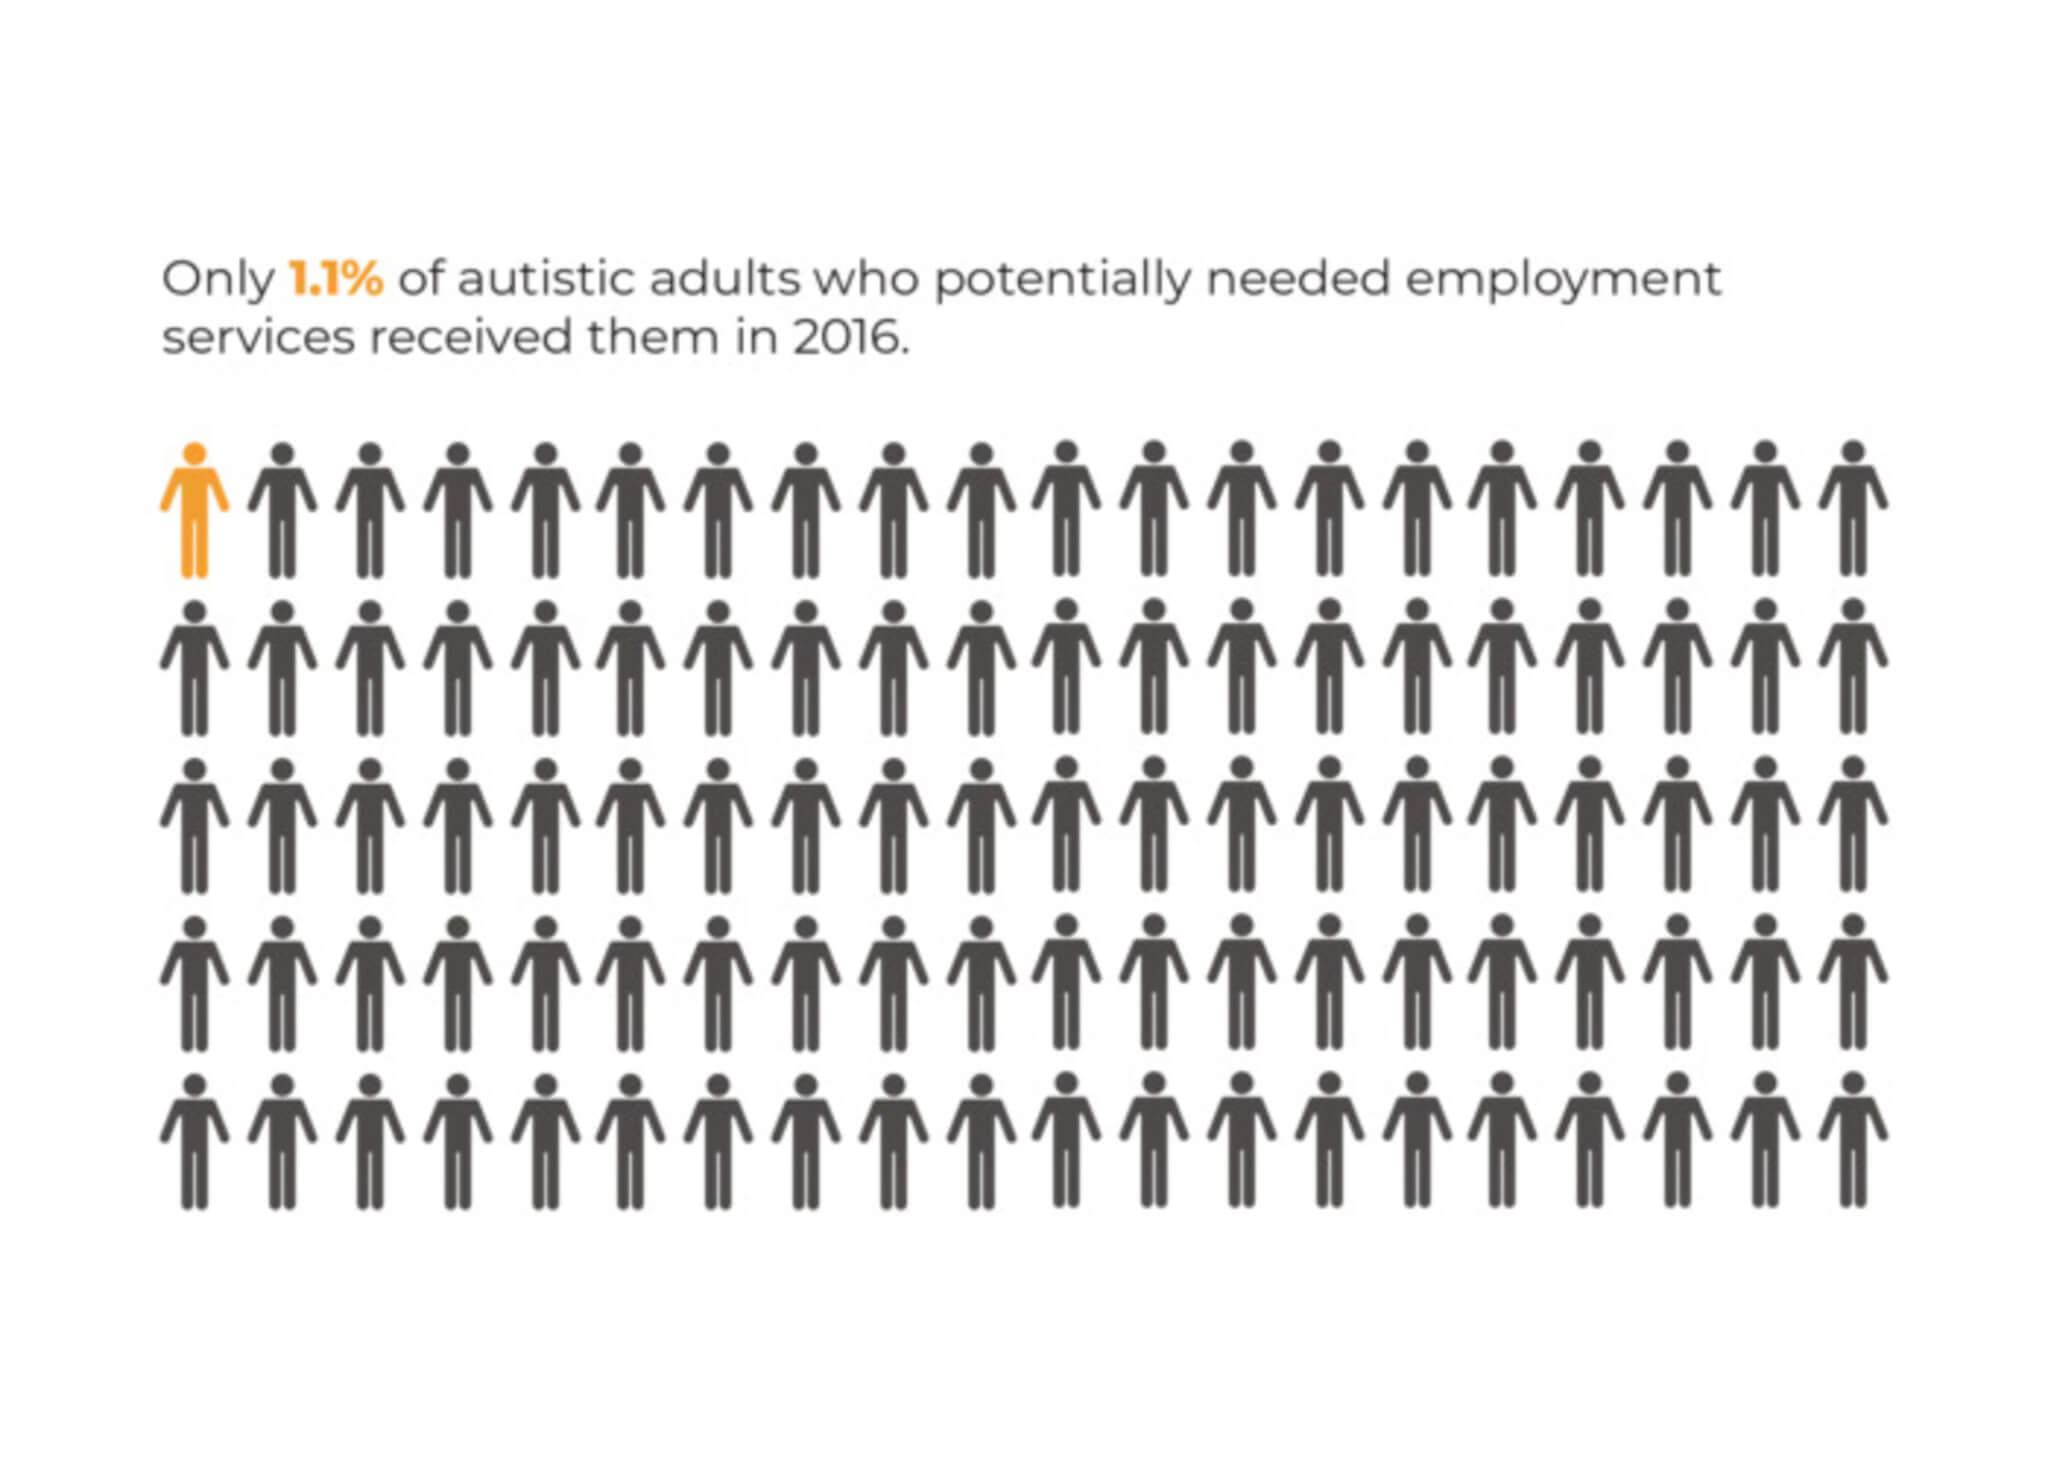 Only 1.1 percent of autistic adults who potentially needed employment services received them in 2016